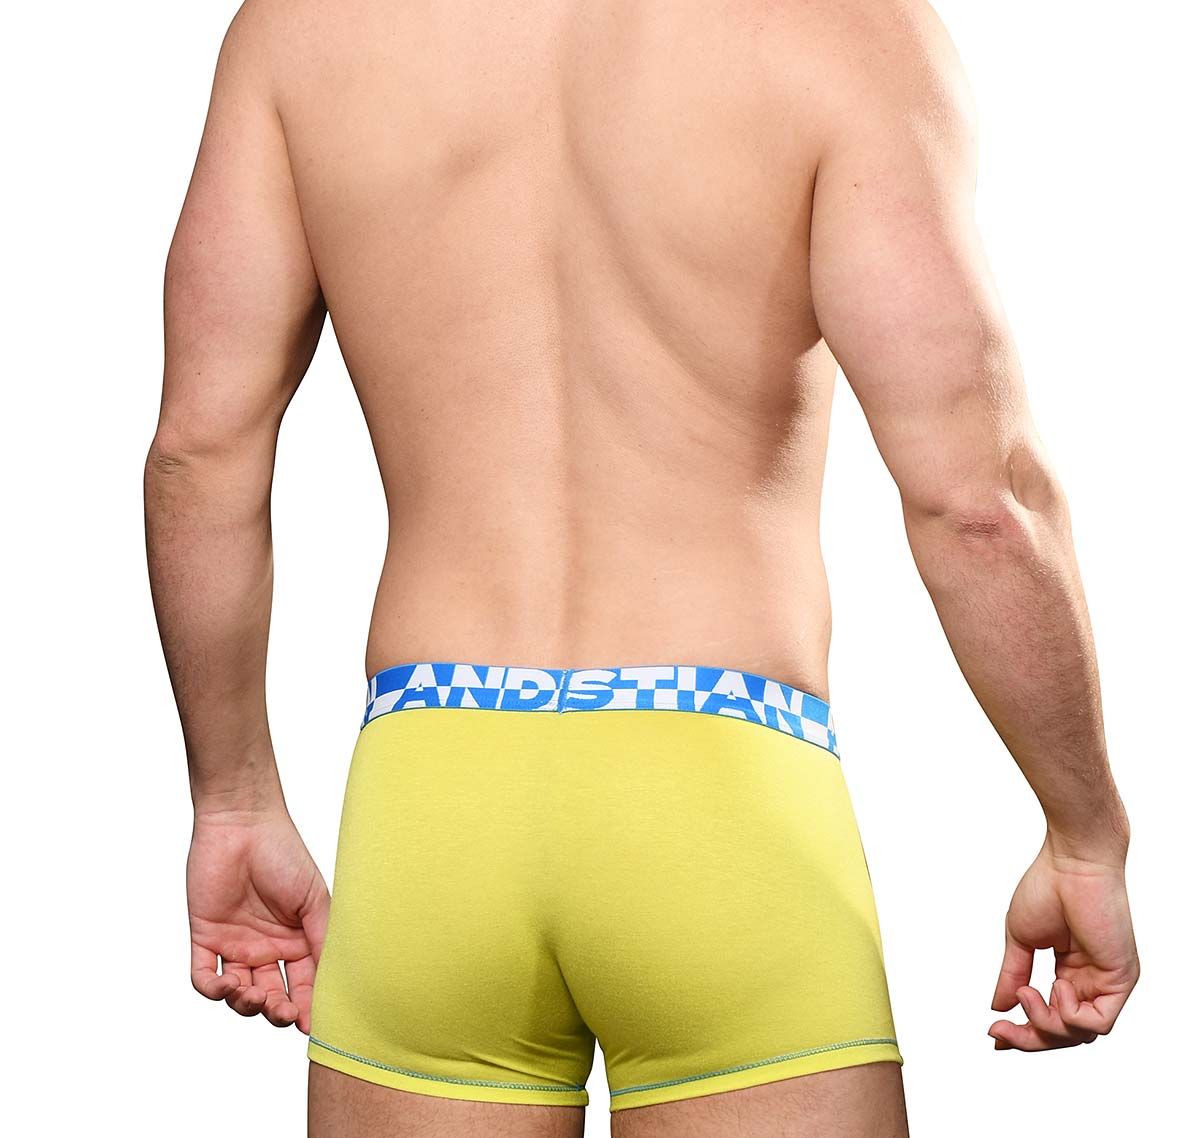 Andrew Christian Boxer ALMOST NAKED HANG-FREE BOXER 93019, jaune